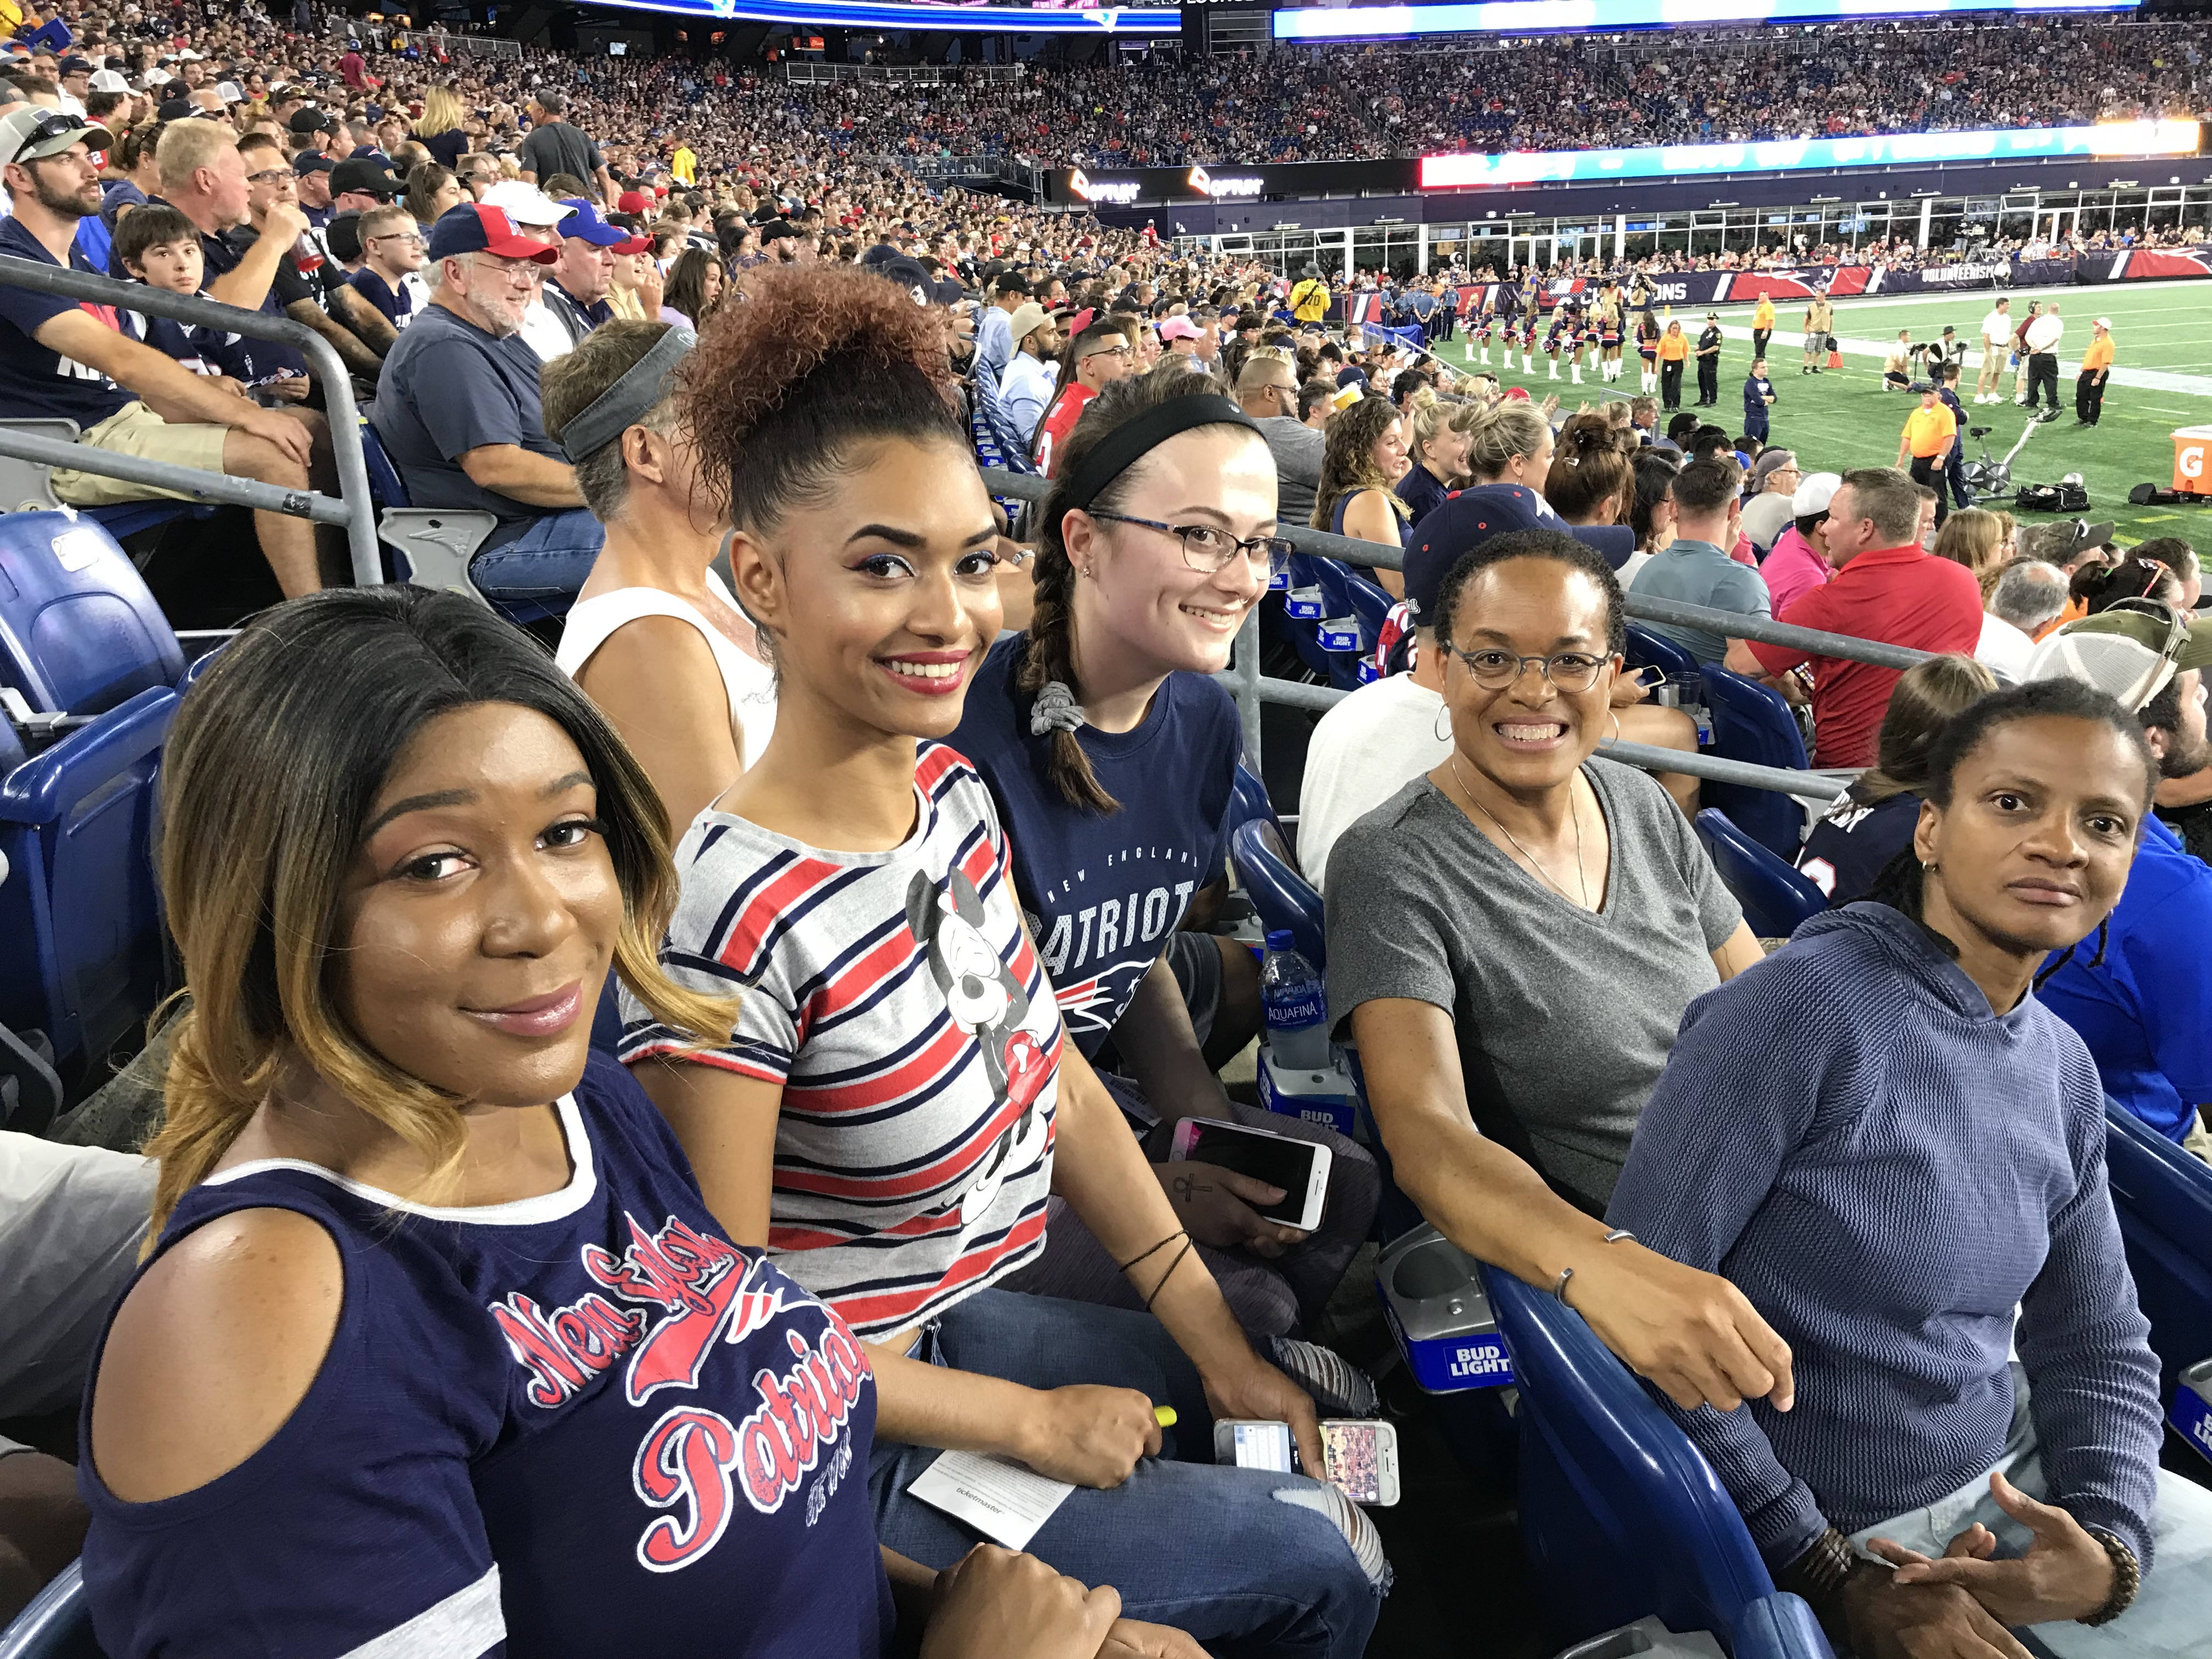 FOCUS@114 residents and staff at a Patriots game.